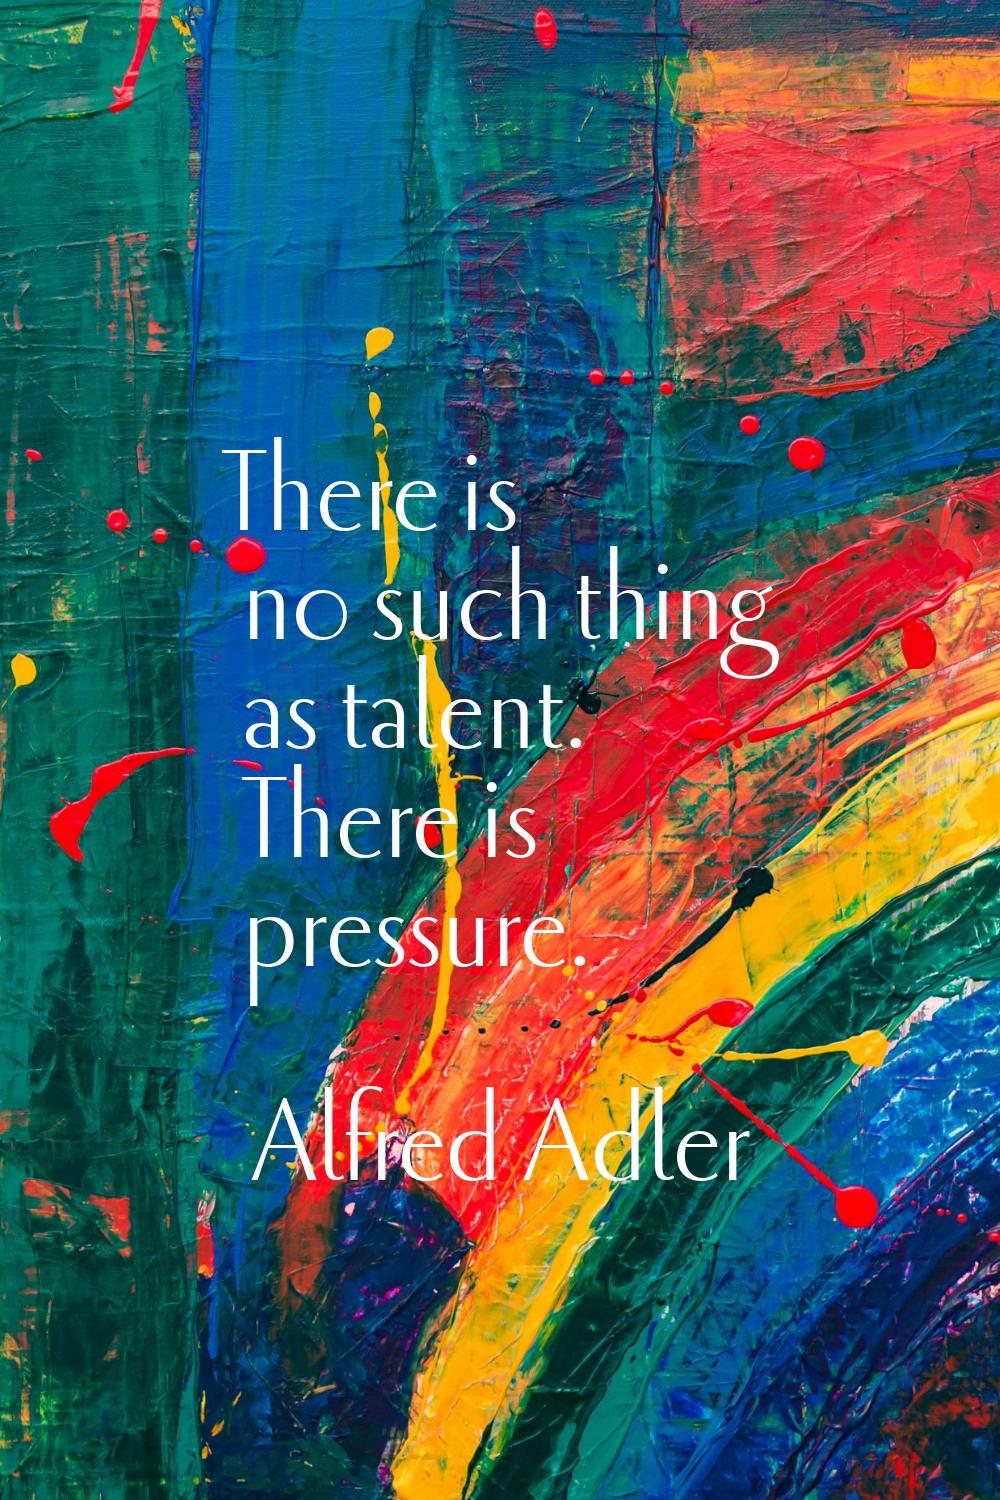 There is no such thing as talent. There is pressure.